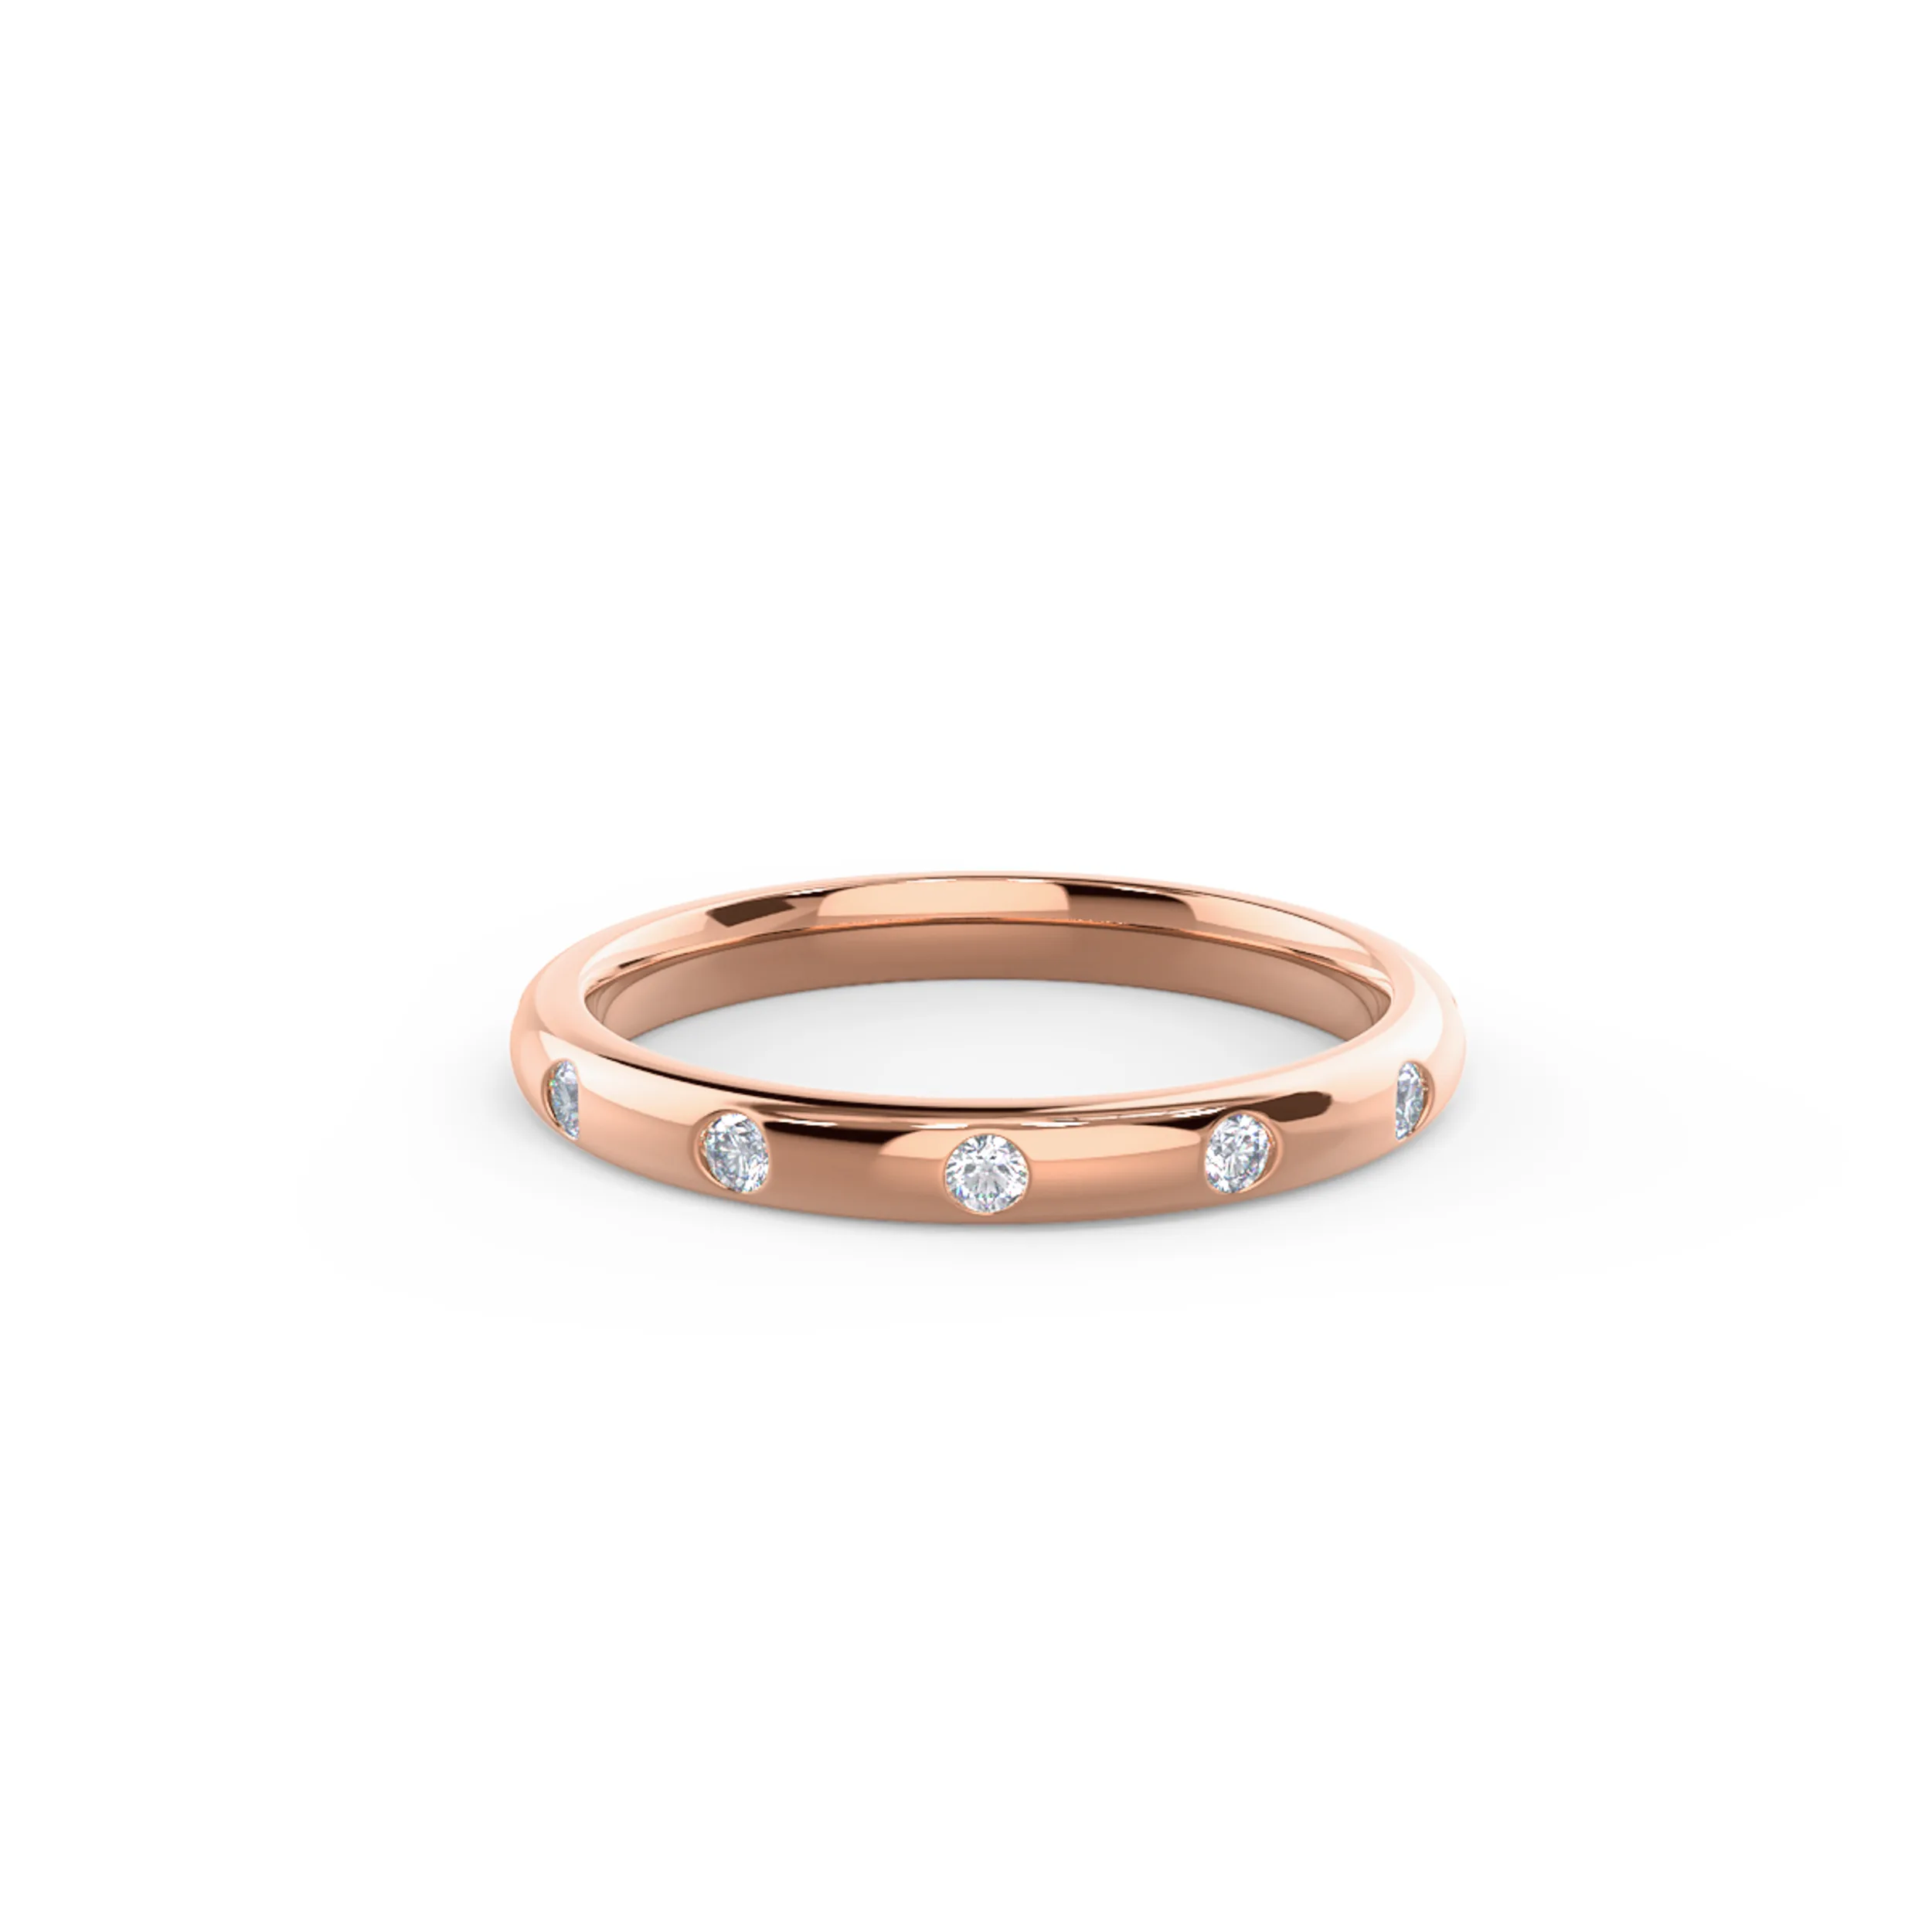 0.25 Carat Created Diamonds Rounded Flush Set Three Quarter Band in 14k Rose Gold (Main View)